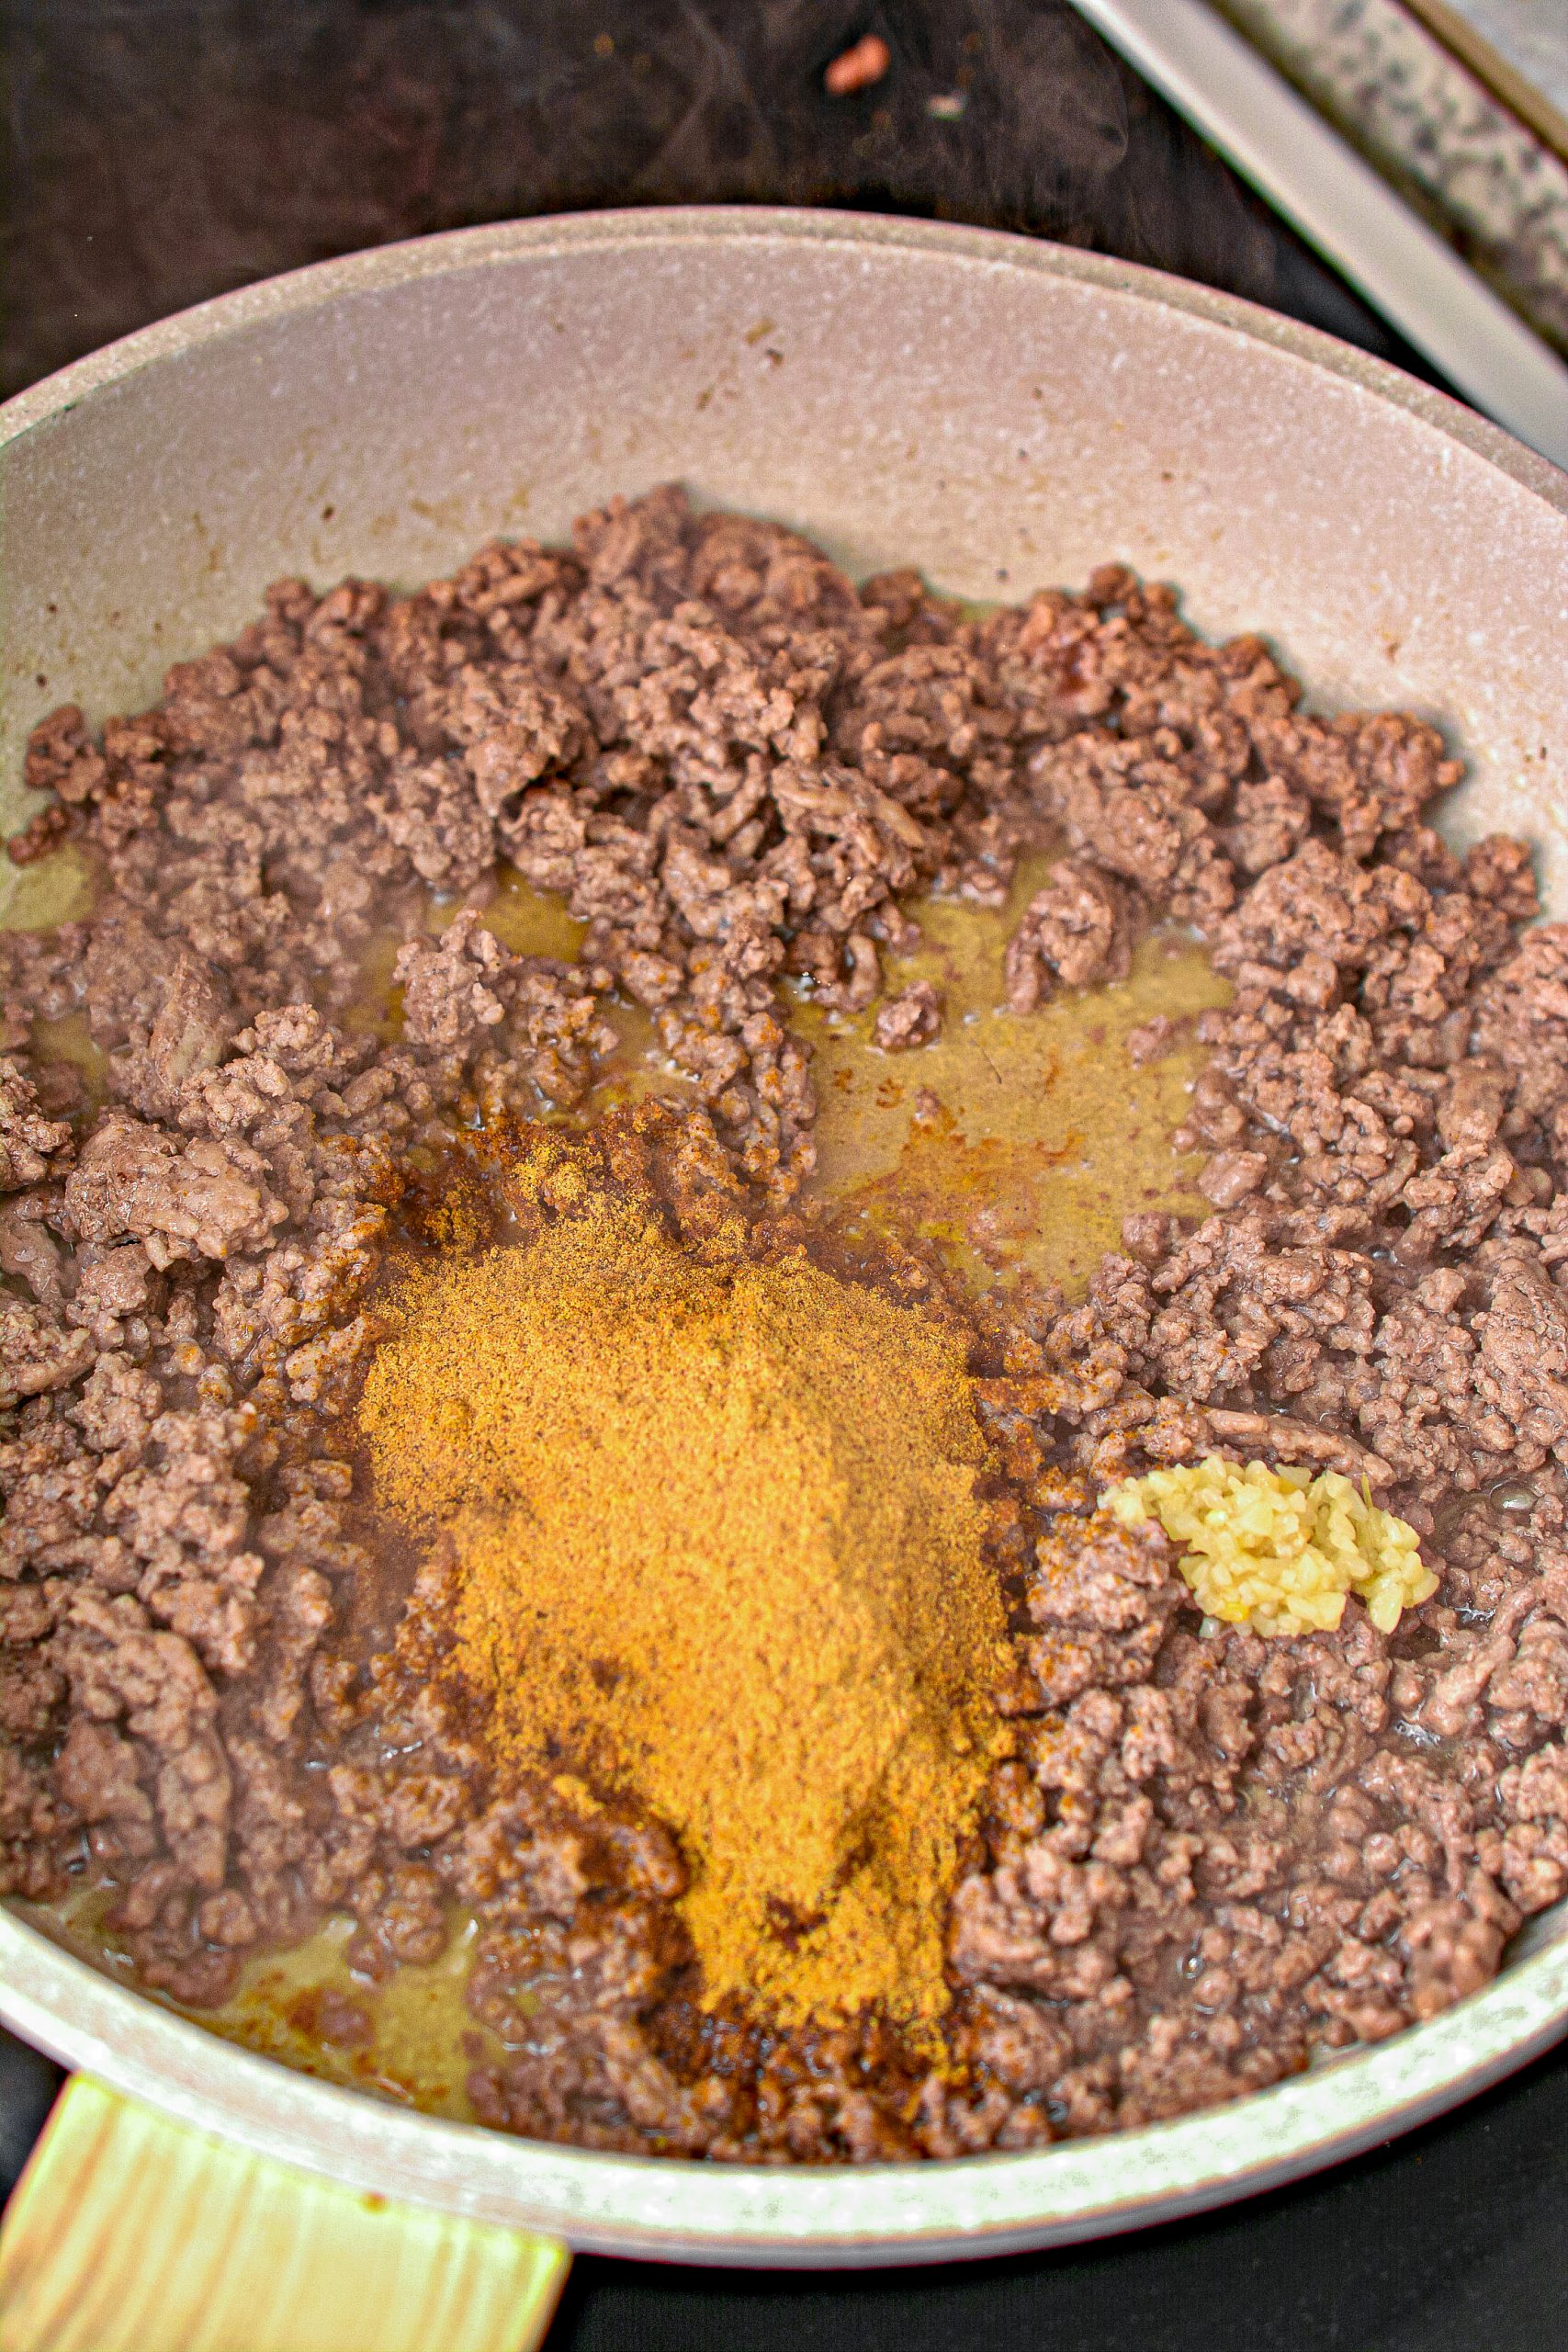 Place the ground beef in a skillet over medium-high heat on the stove, and cook until completely browned.